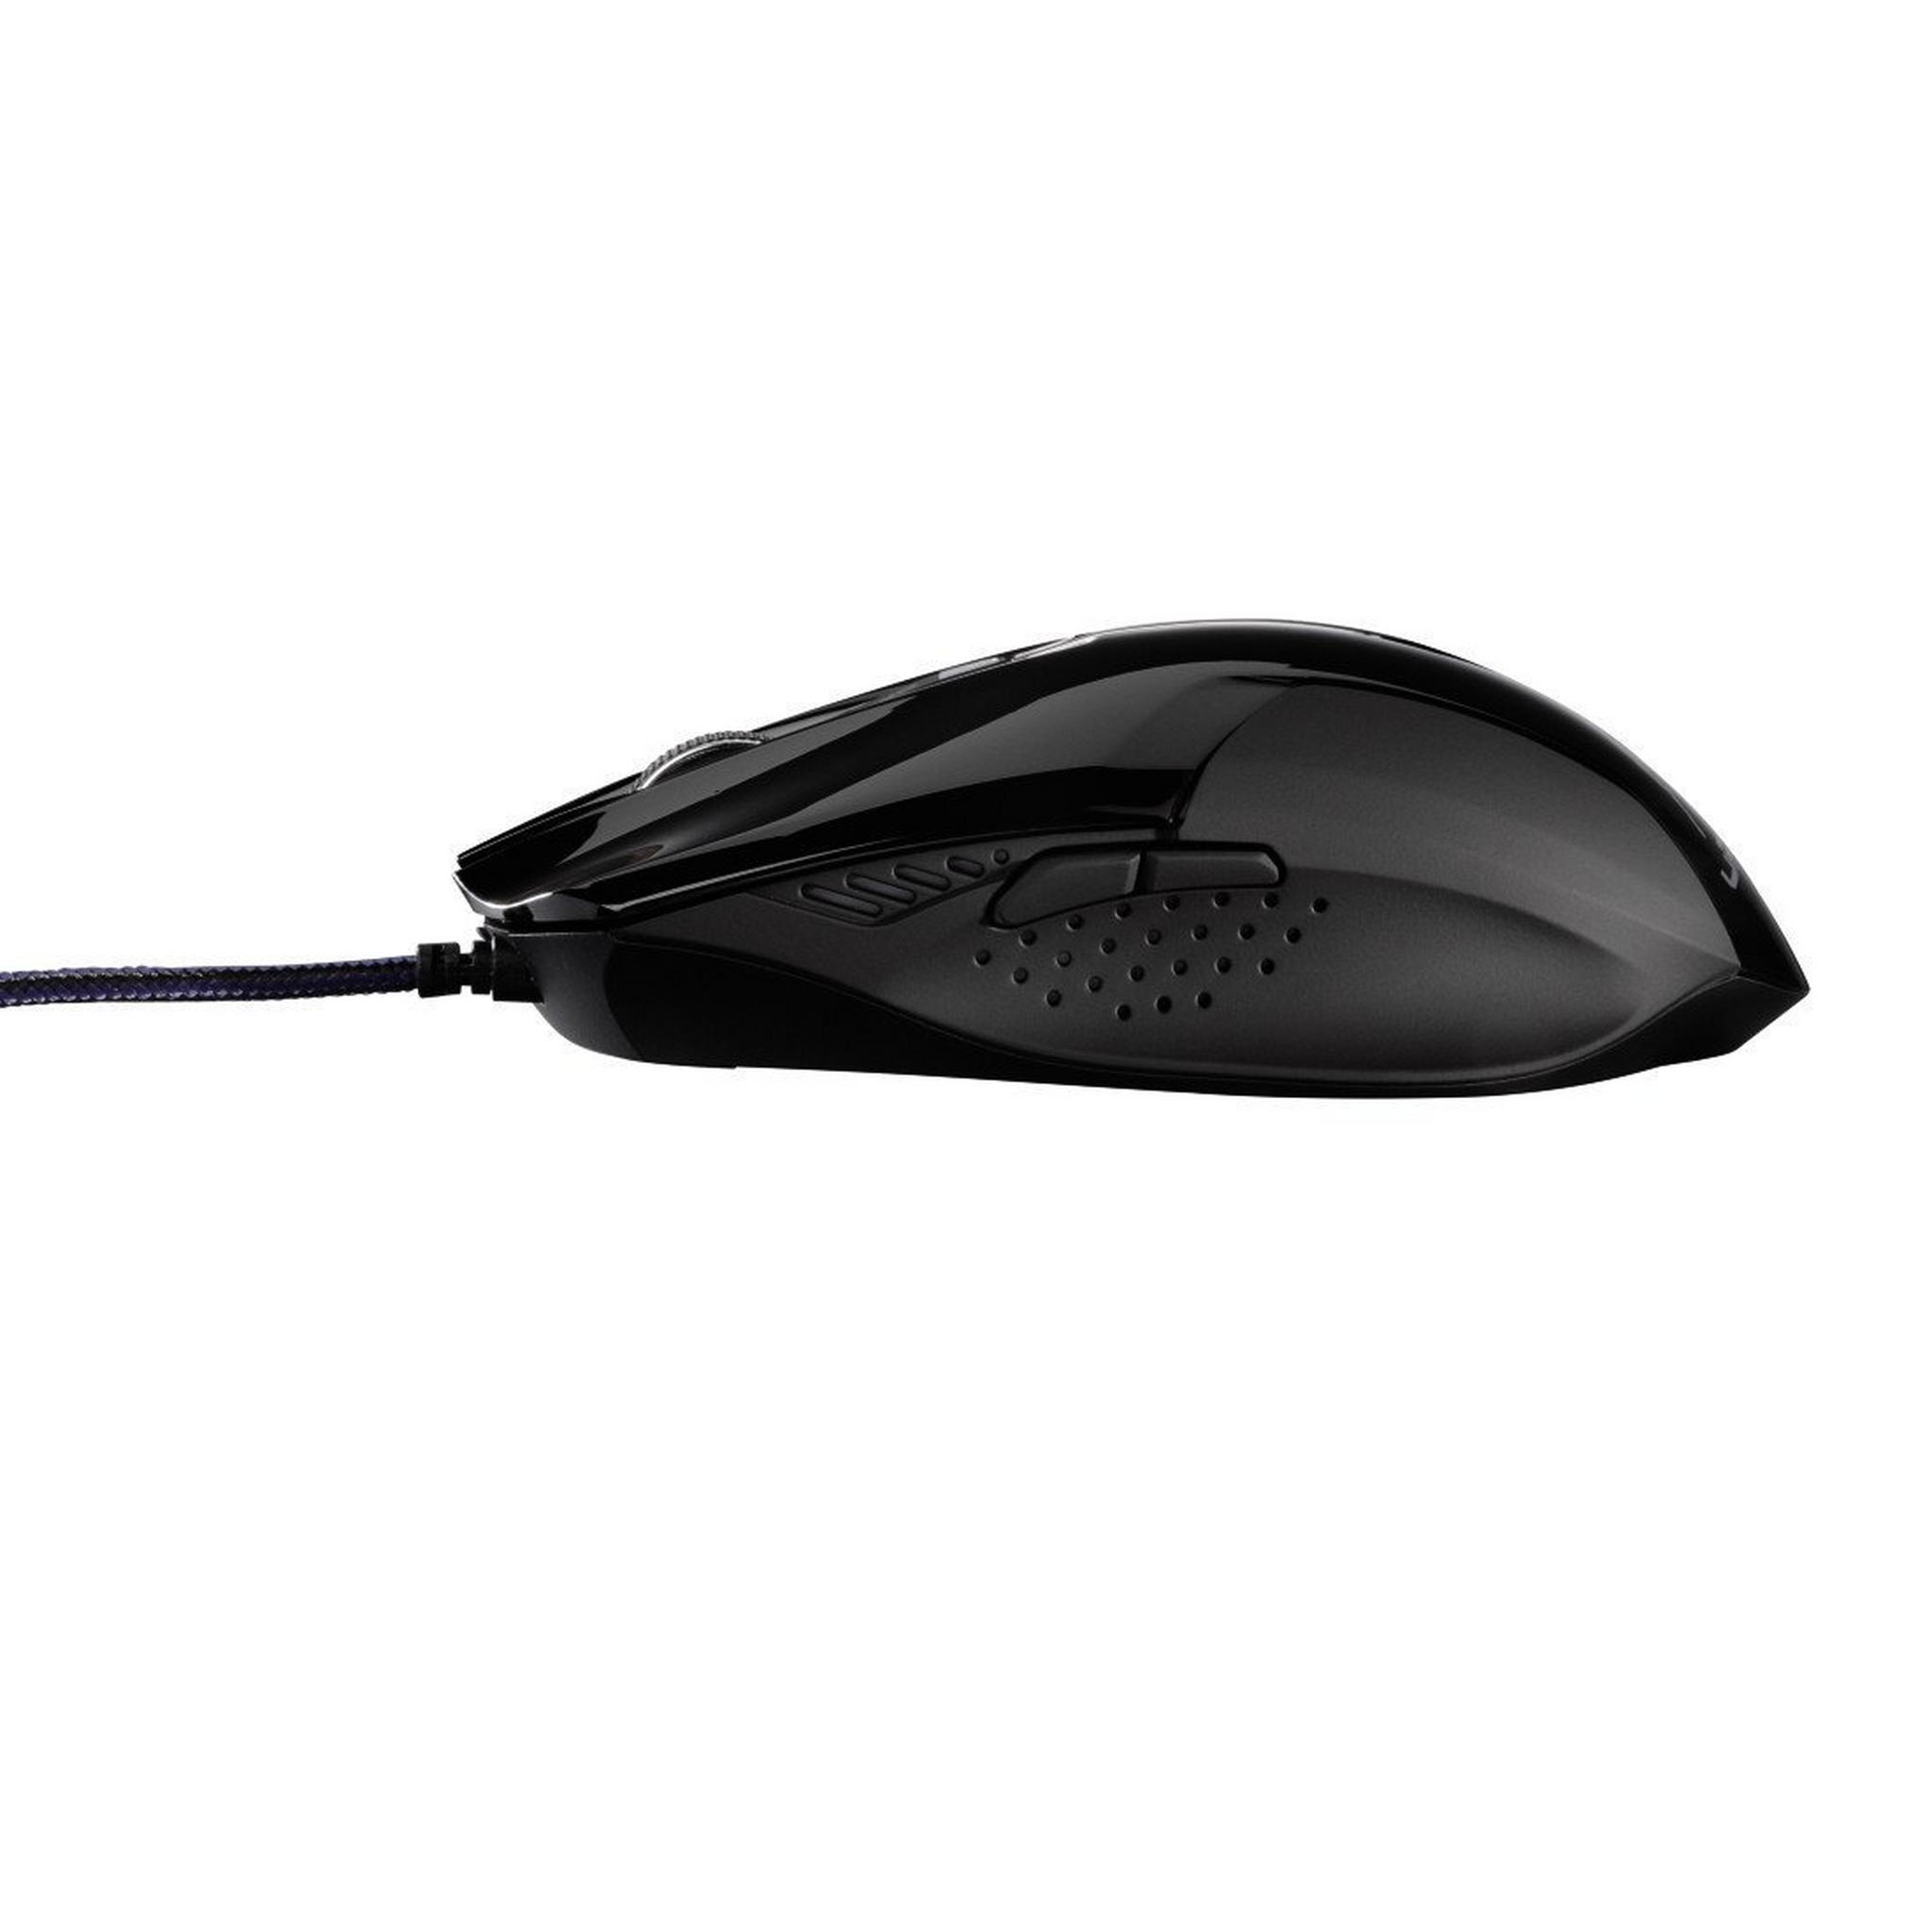 Hama Urage Evo Wired Gaming Mouse for PC